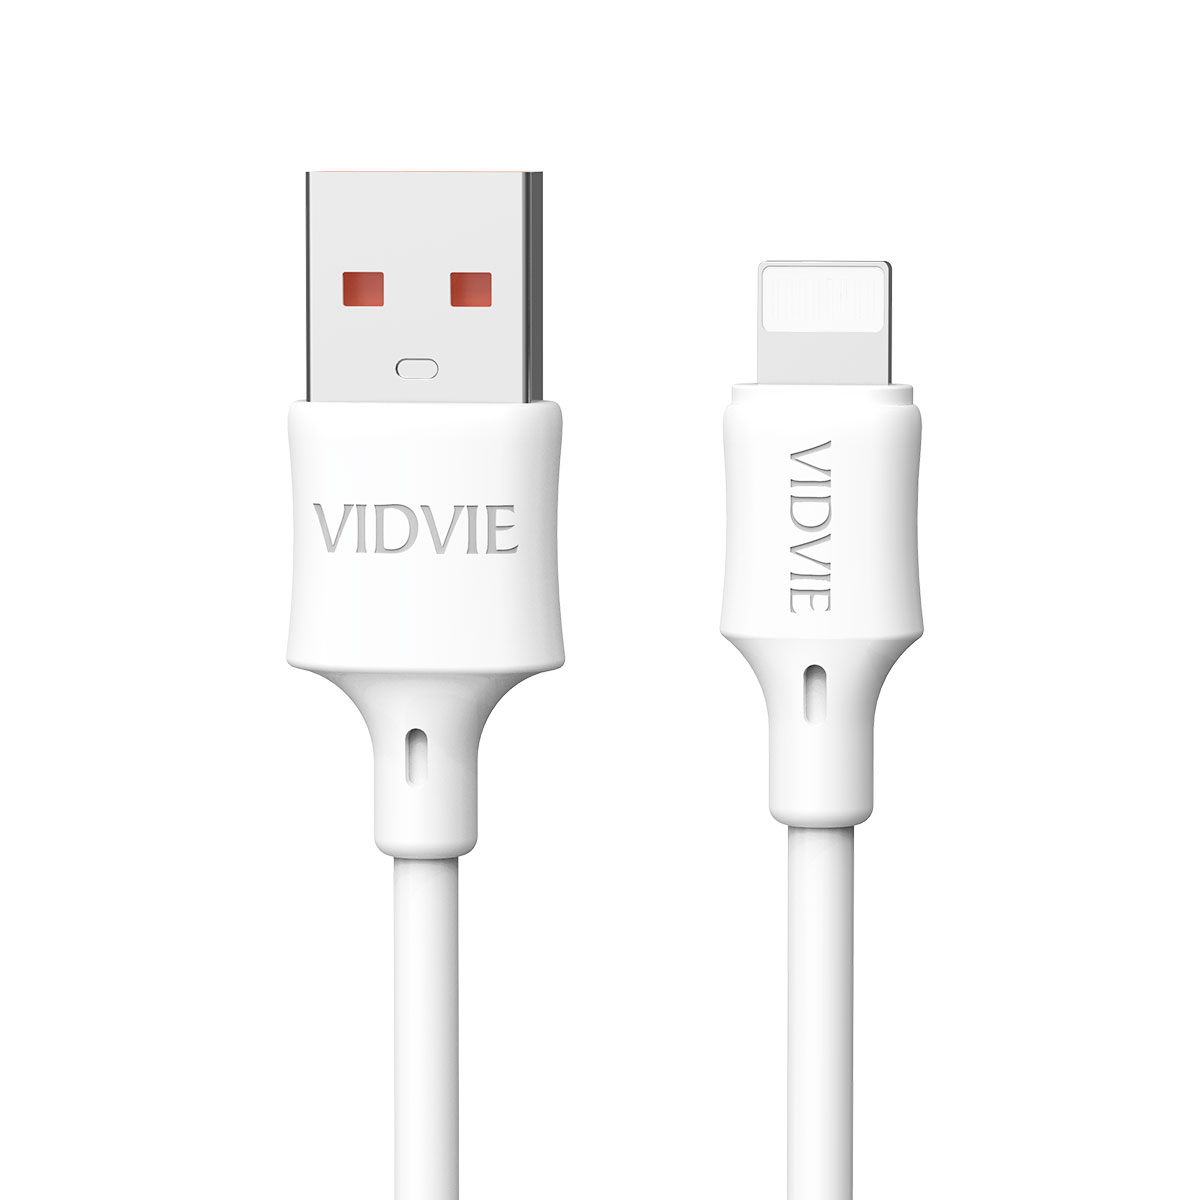 CABLE Lightning FOR IPHONE & IPAD DATA & CHARGE VIDVIE 2.1A CB456I ,Other Smartphone Acc